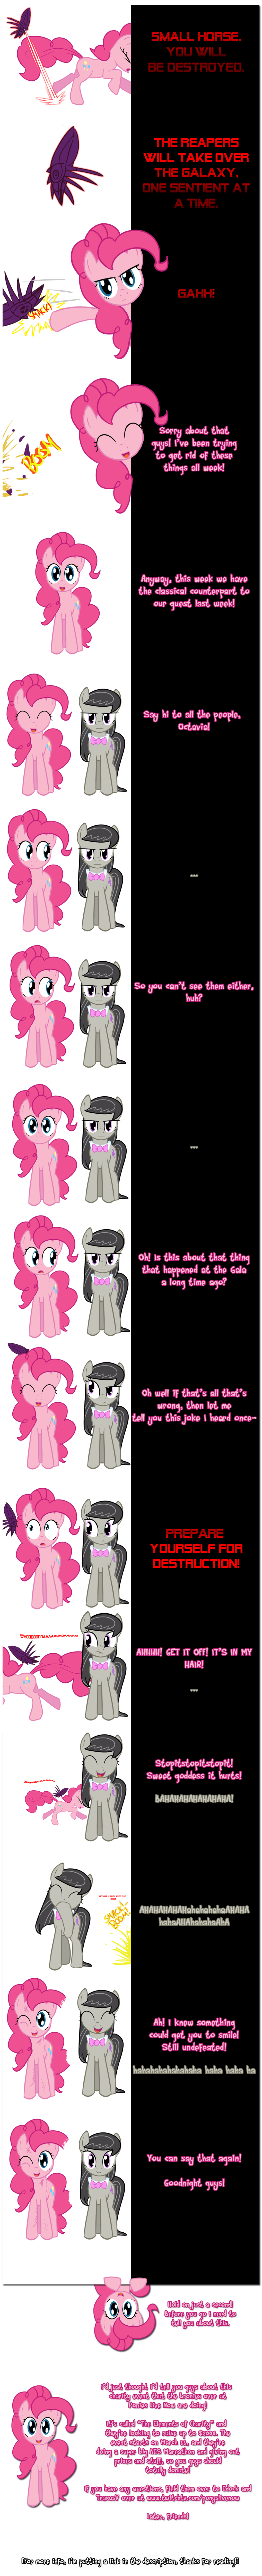 pinkie_and_octavia_say_goodnight__by_undead_niklos-d4schb7.png